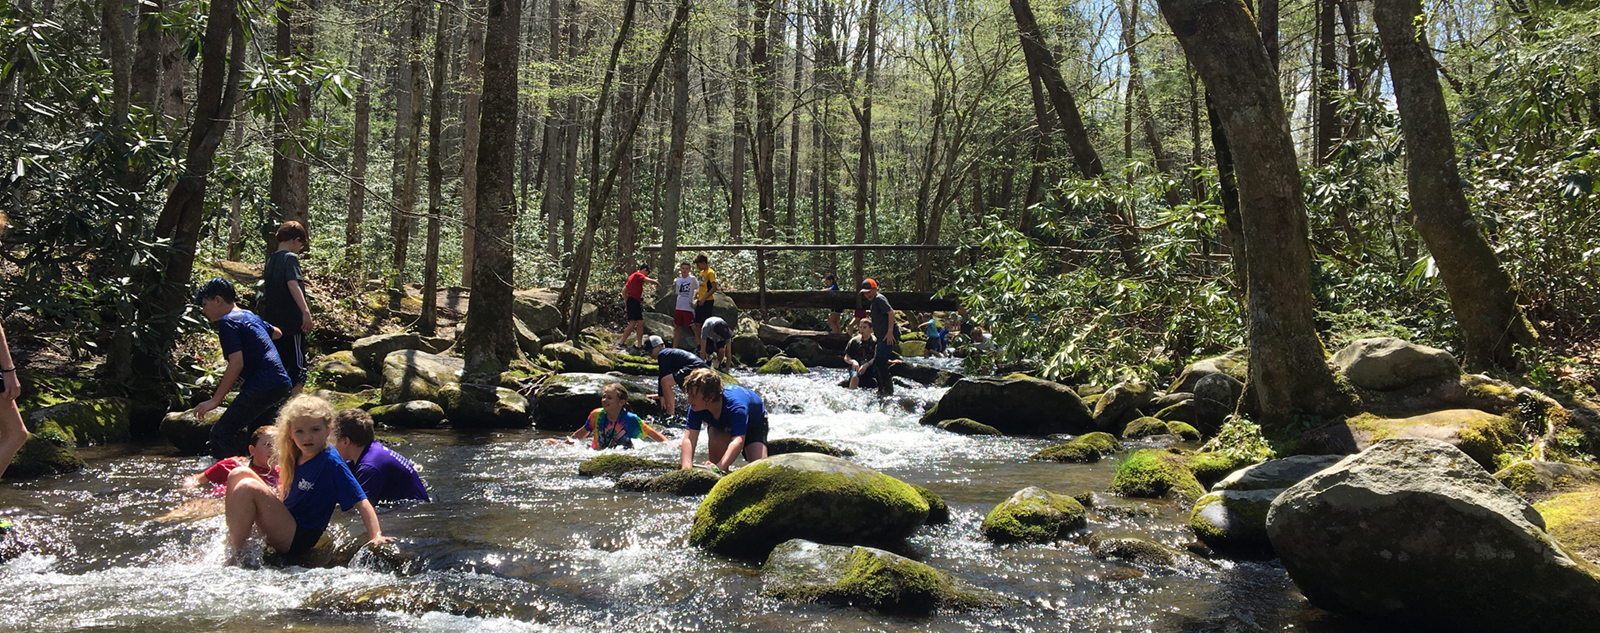 Students playing in the river at Tremont